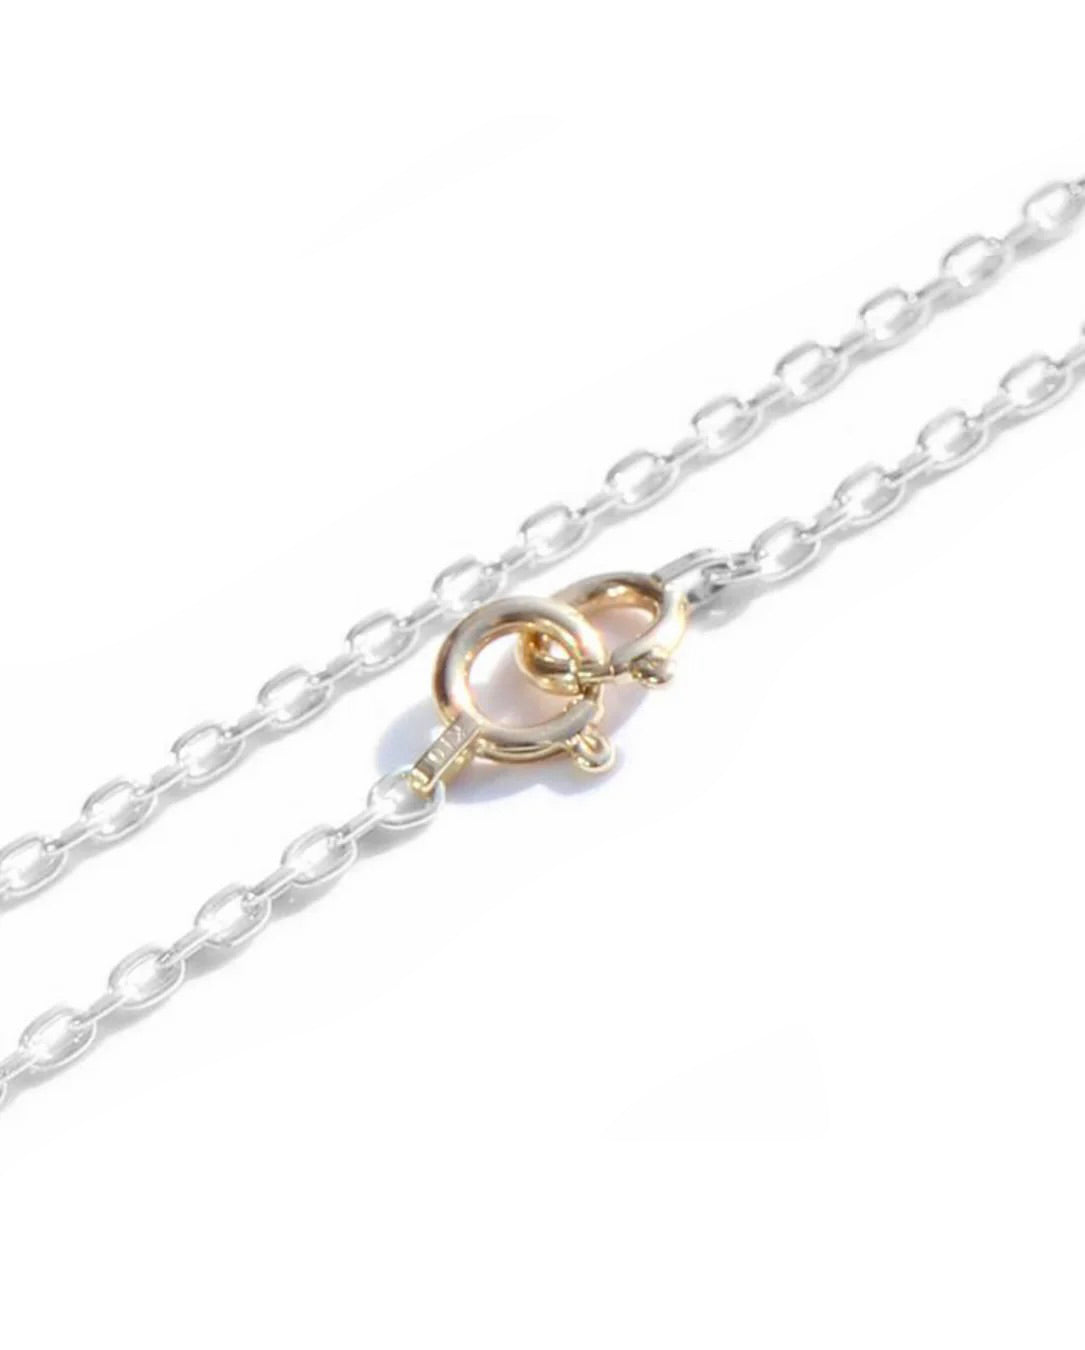 Oval Chain Necklace (40cm)